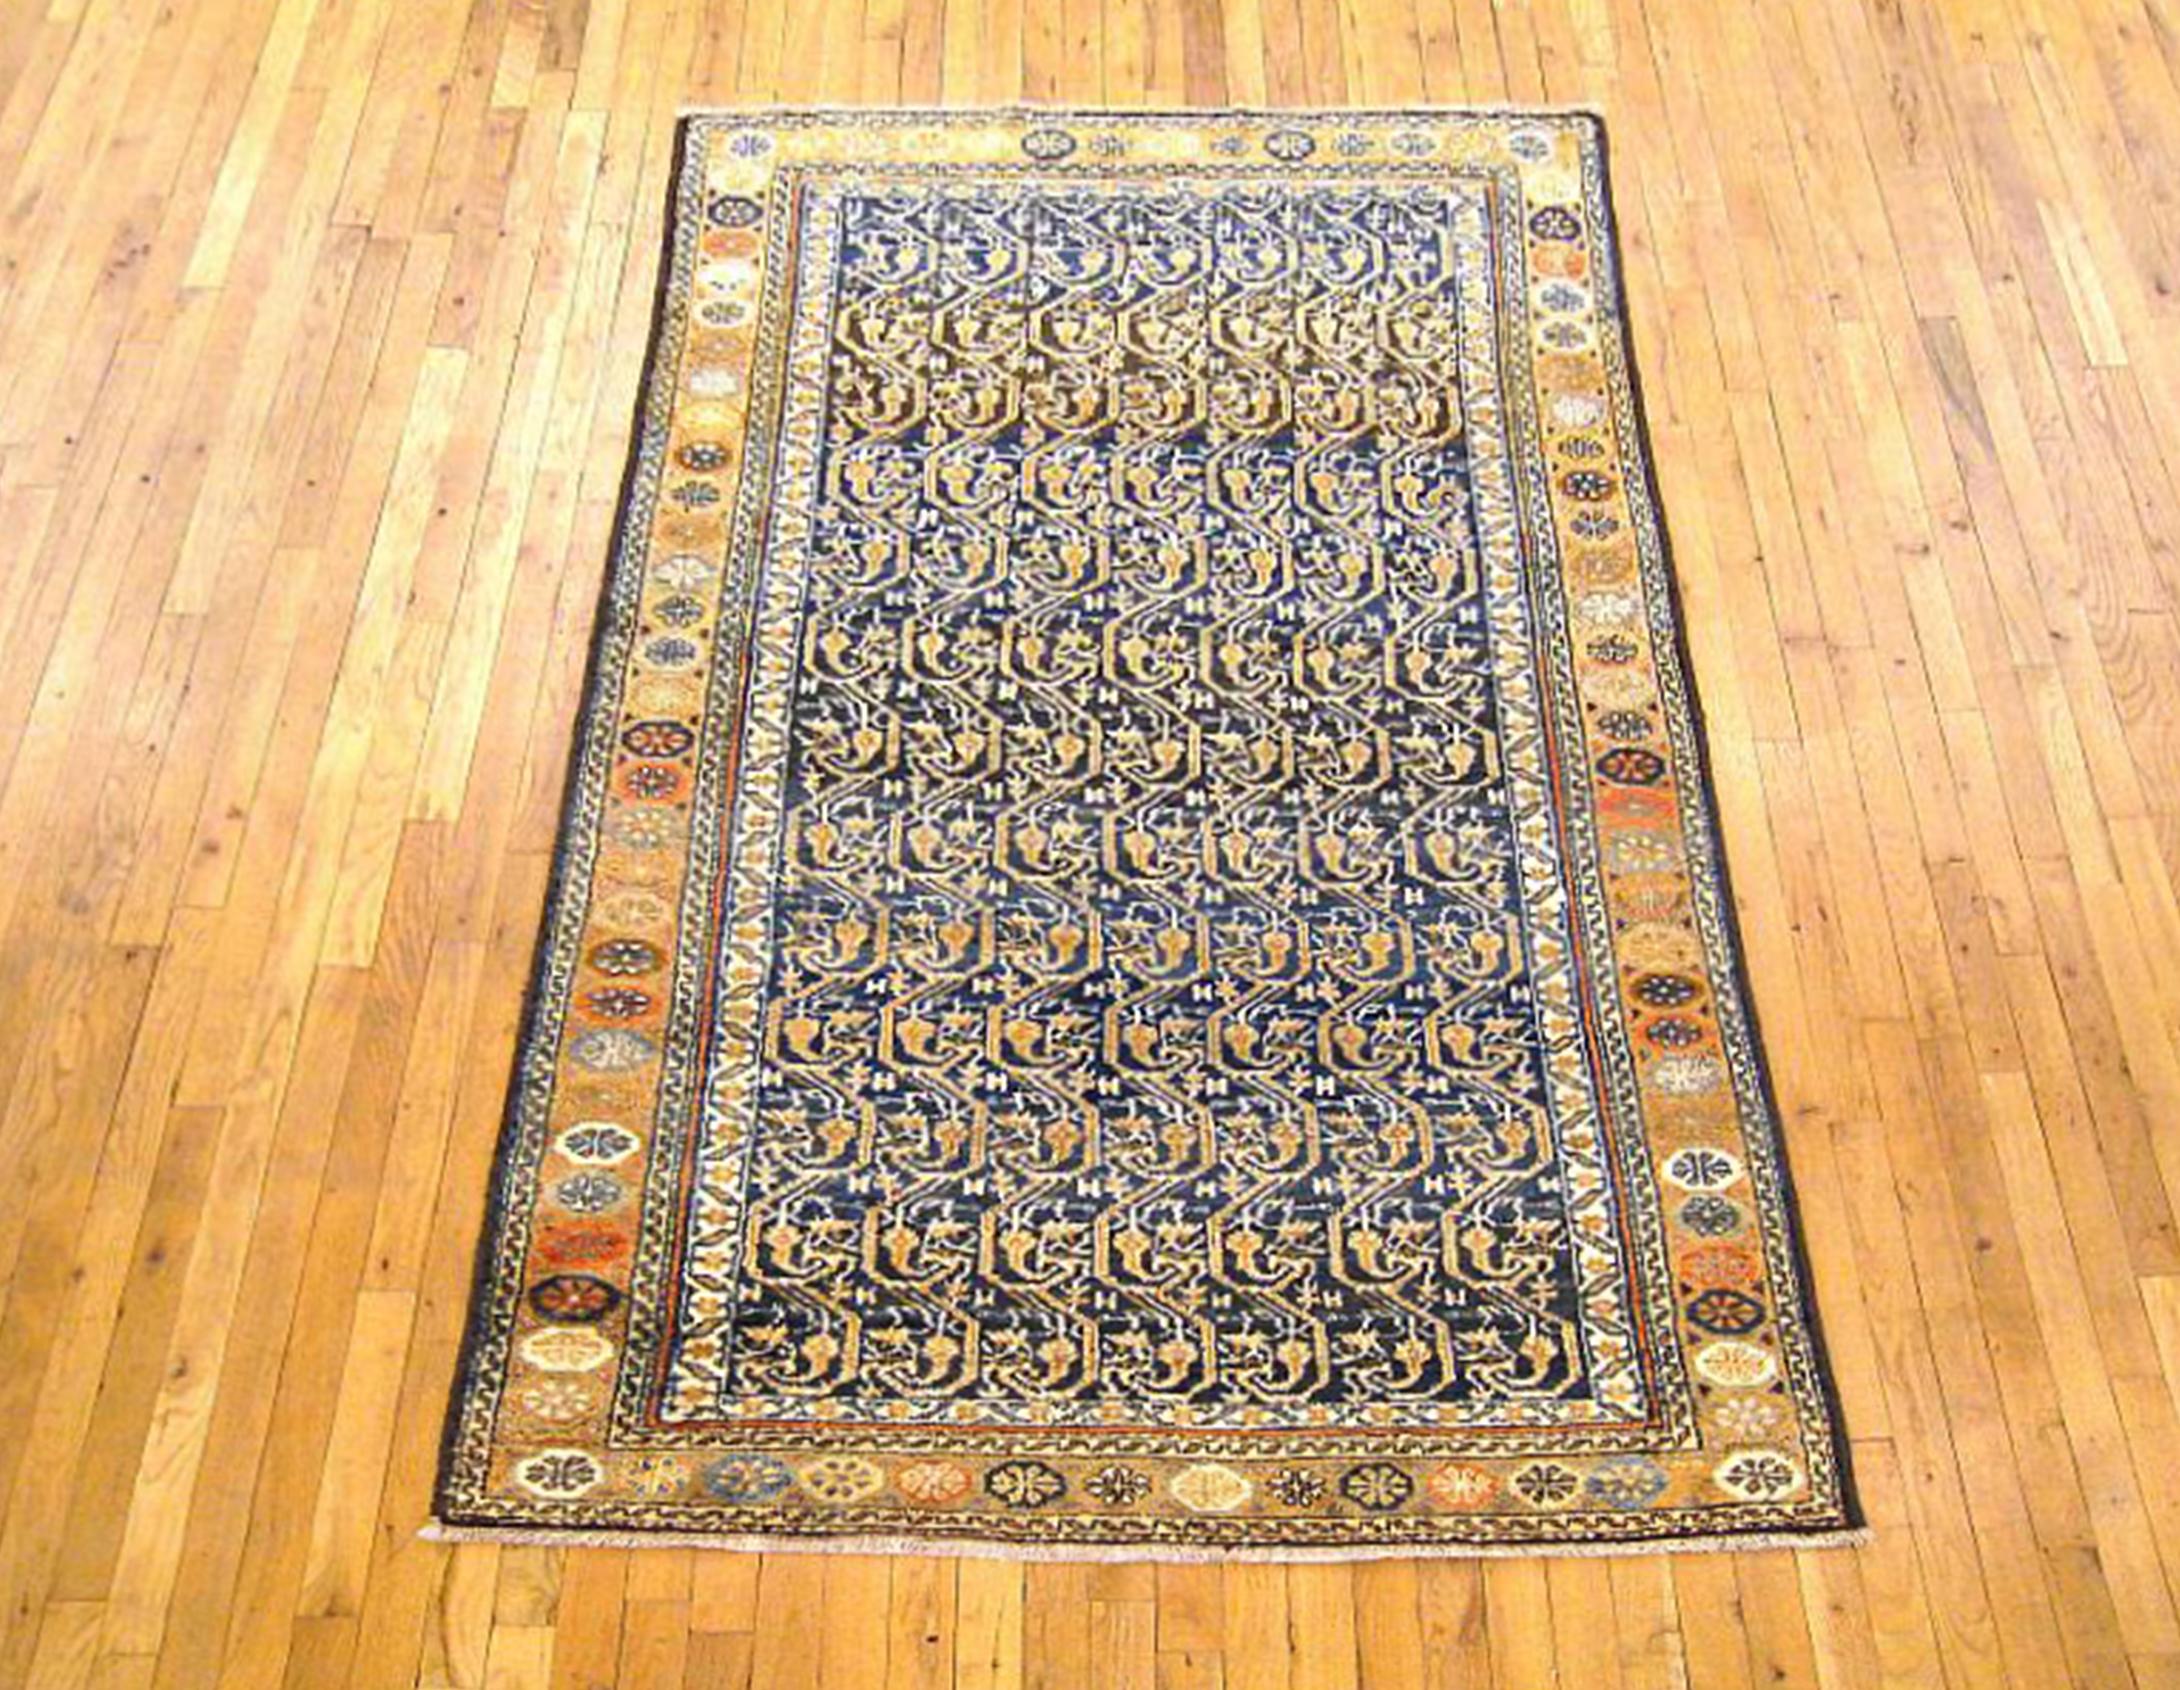 Vintage Persian Kurd Oriental rug, small size

A vintage Kurd oriental rug, size 6'8